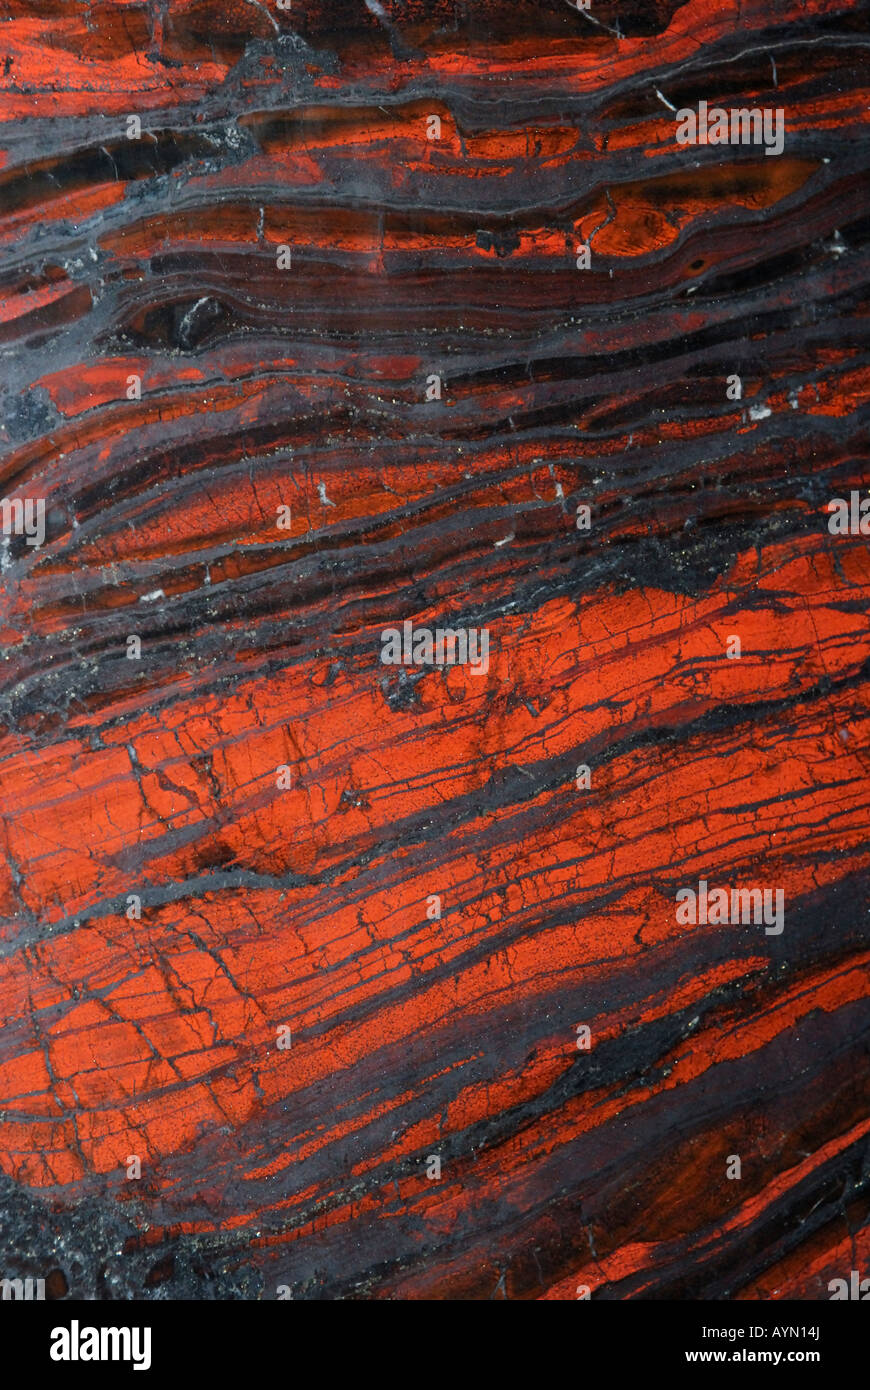 Rock showing layers of red jasper and iron magnetite Stock Photo